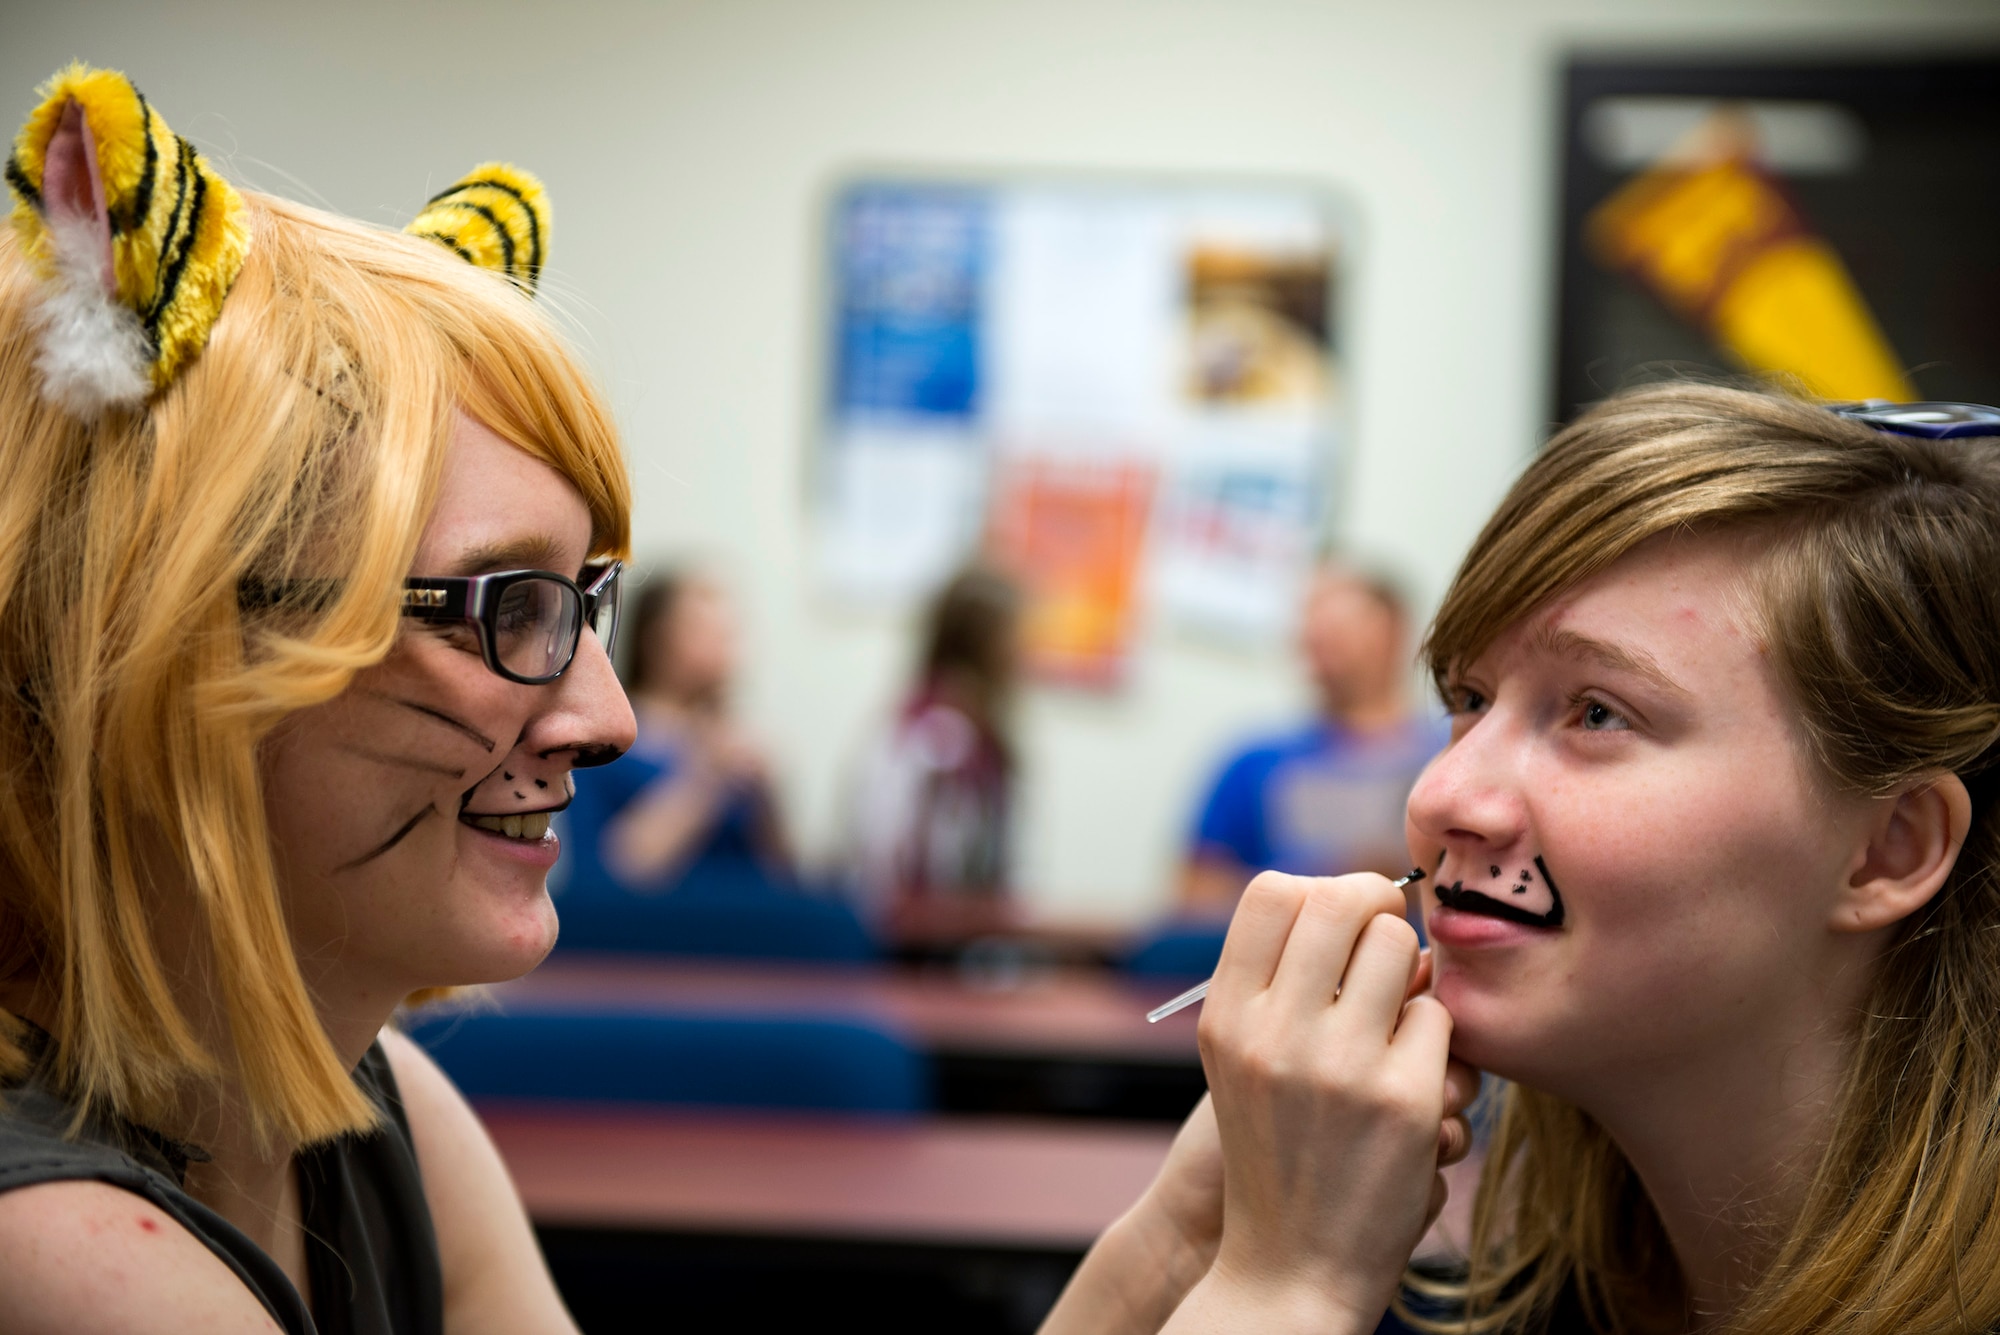 Rebecca Straton, left, convention programming director, paints the face of Madison, convention guest, while at a face painting seminar during Cub Con, a multi-genre entertainment convention, March 17, 2018, at Moody Air Force Base, Ga. The convention was held to spread awareness of the library’s new weekend hours as well as get people excited for Tiger Con, scheduled for April 14-15. (U.S. Air Force photo by Airman 1st Class Erick Requadt)